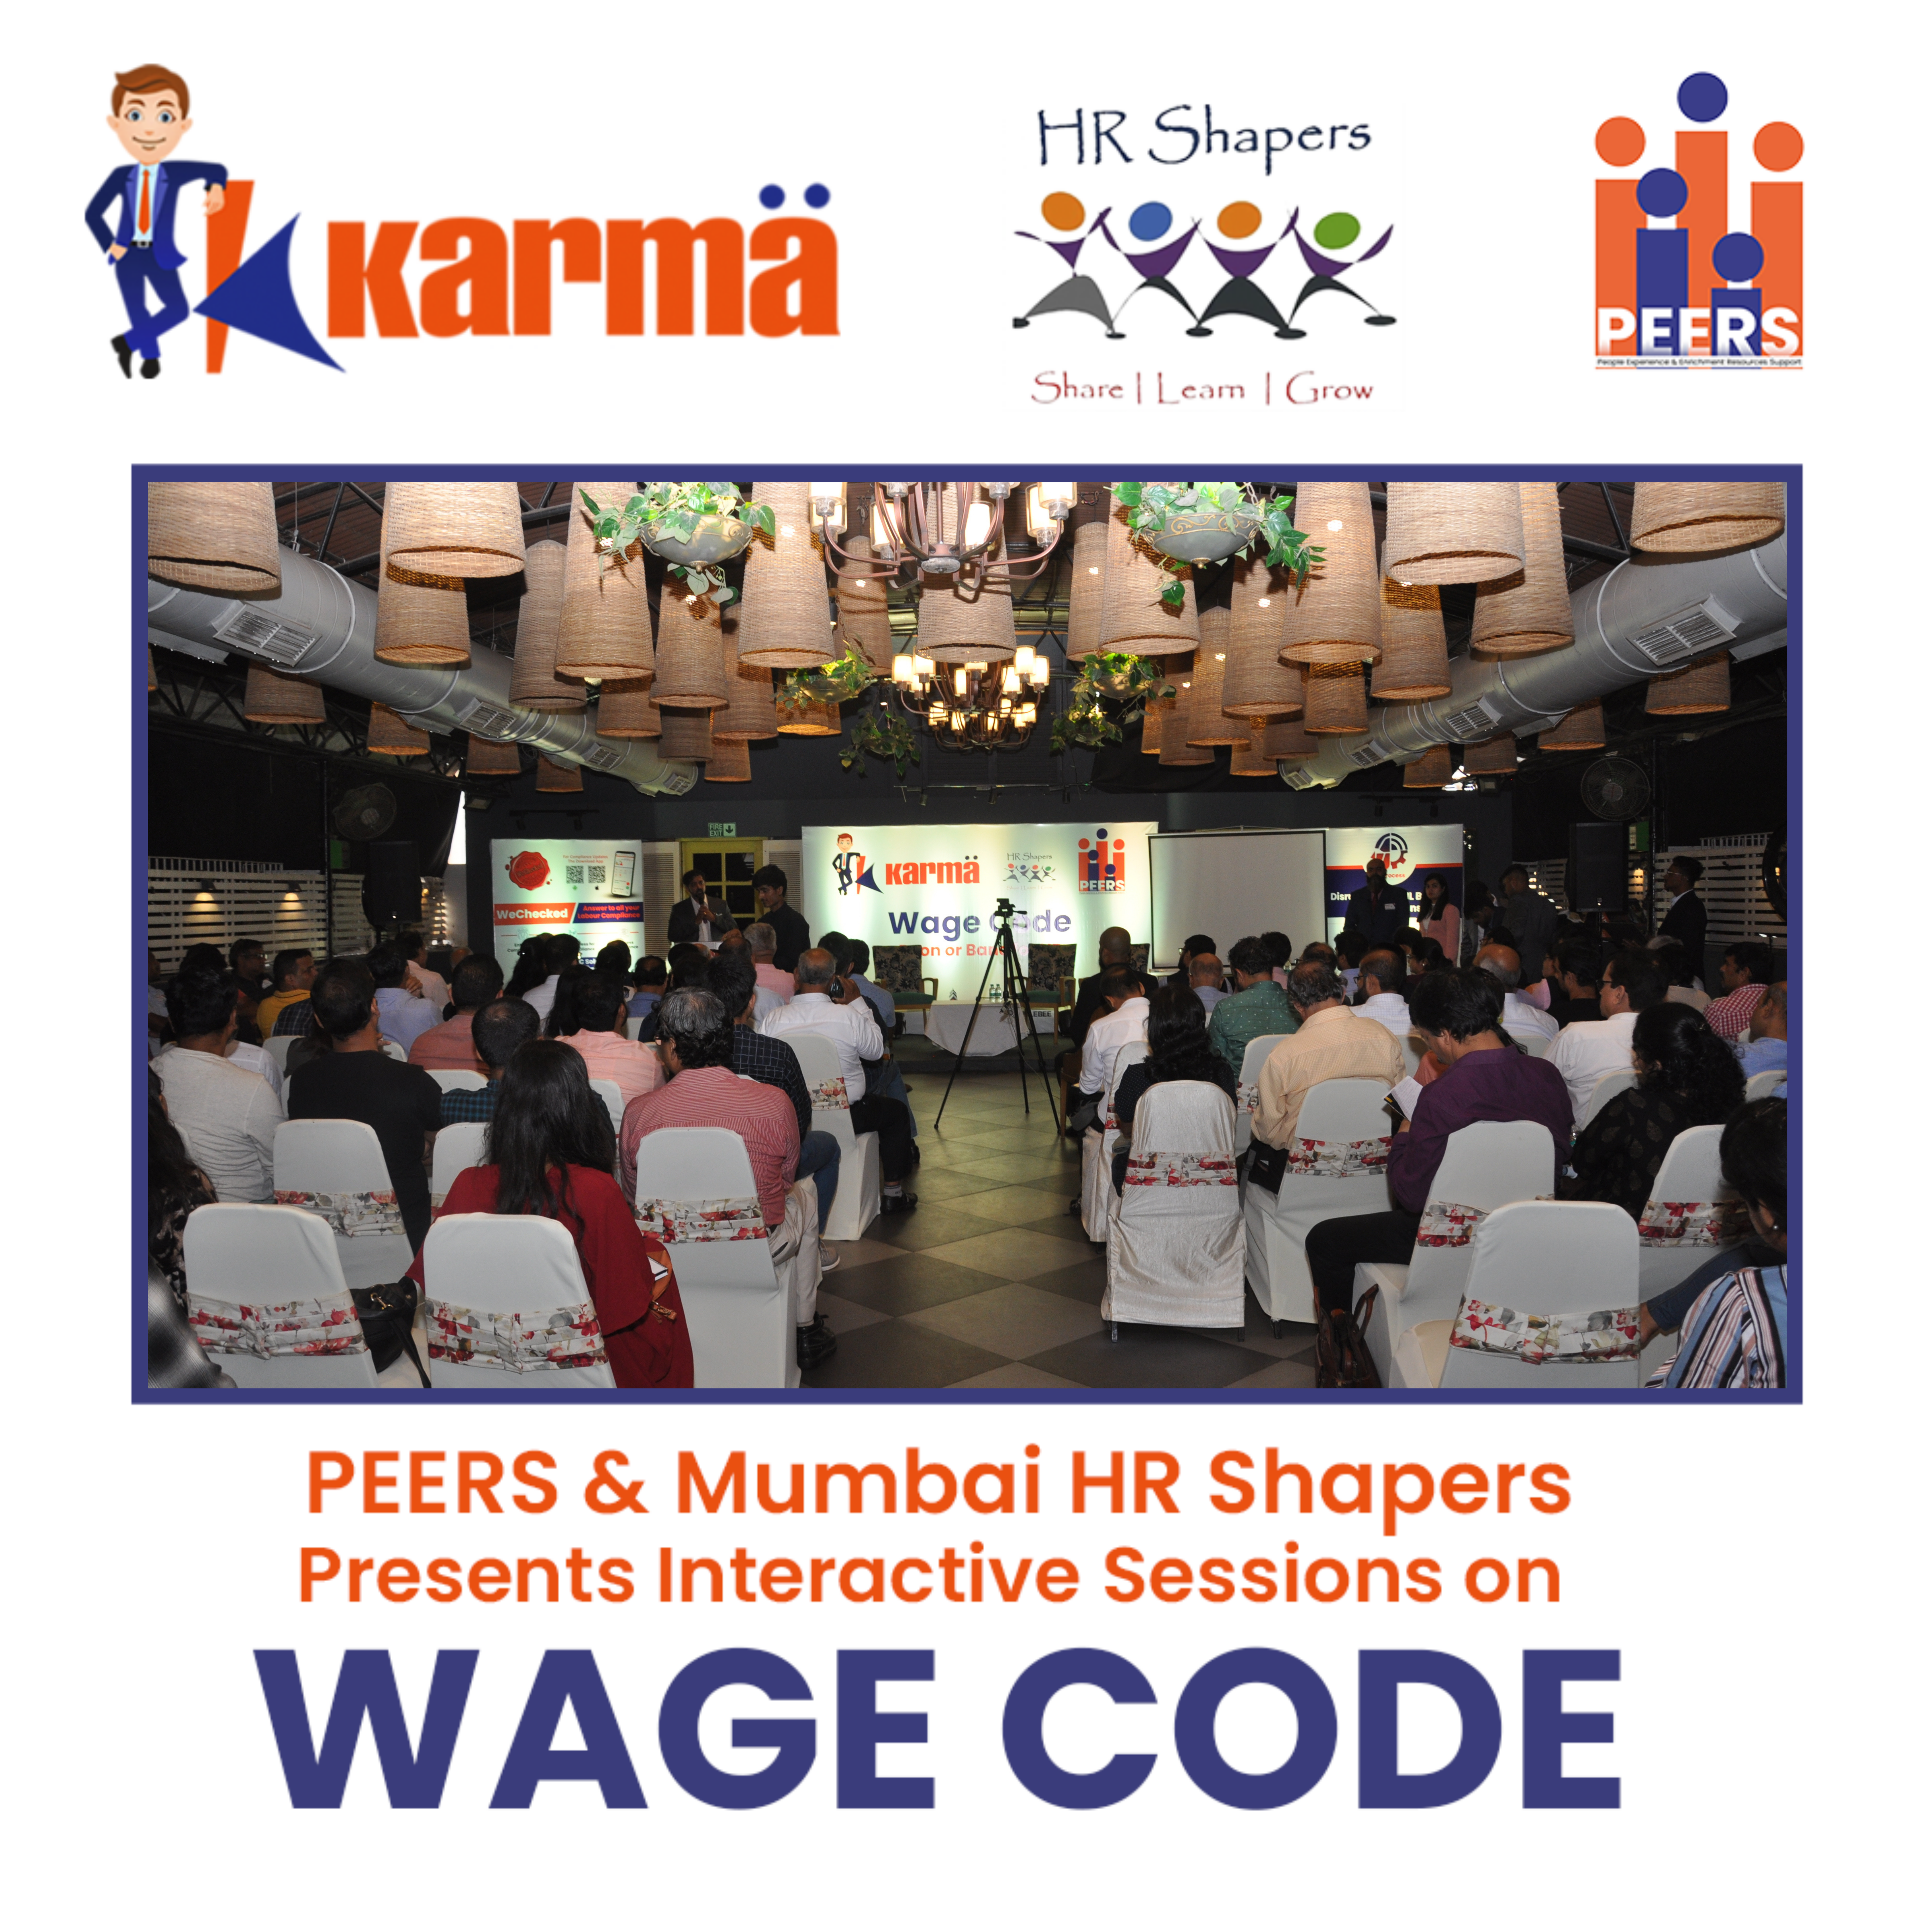 Karma together with HR Shapers and PEERS presented- the HR Conclave